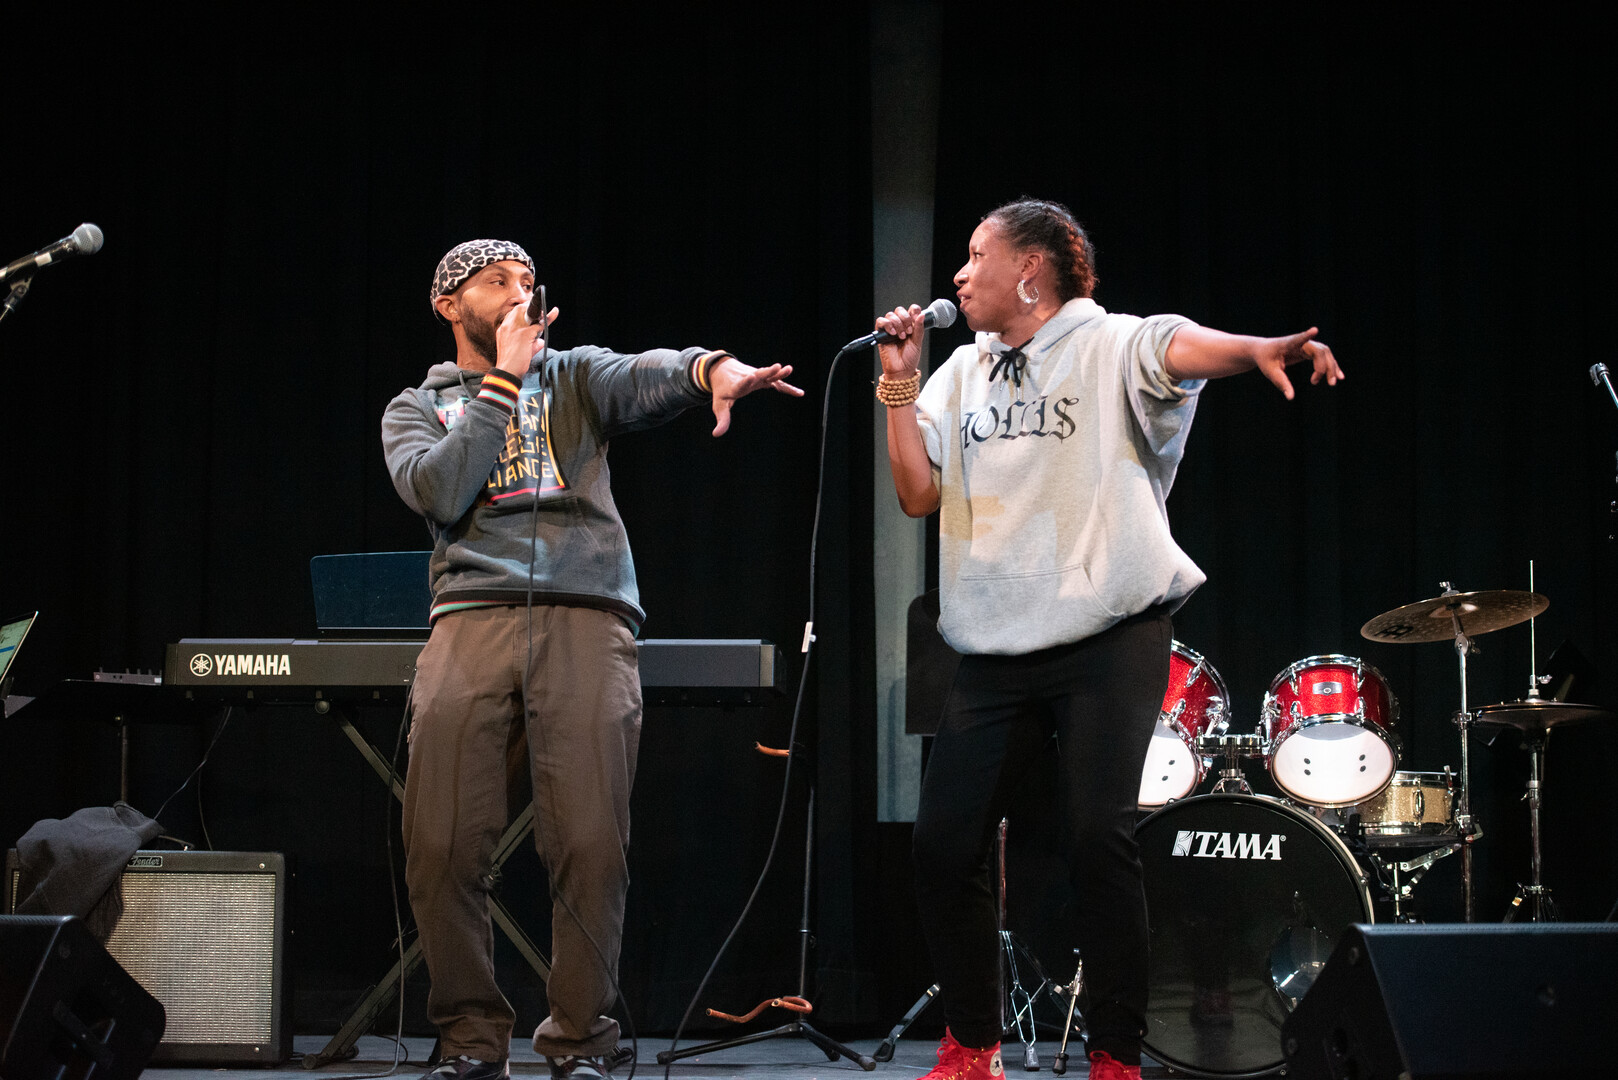 Internationally recognized hip-hop duo The Reminders and Colorado College songwriting students took the stage for a musical collaboration at the Fine Arts Center at Colorado College on Friday, Nov. 11. The event featured a full set by The Reminders and fresh, collaborative songs created by the students enrolled in the Songwriting: Creative Workshop course. Students’ songs put to music texts written for the project by persons incarcerated at the women’s ward at the El Paso County Jail. Photos by Mila Naumovska ’26